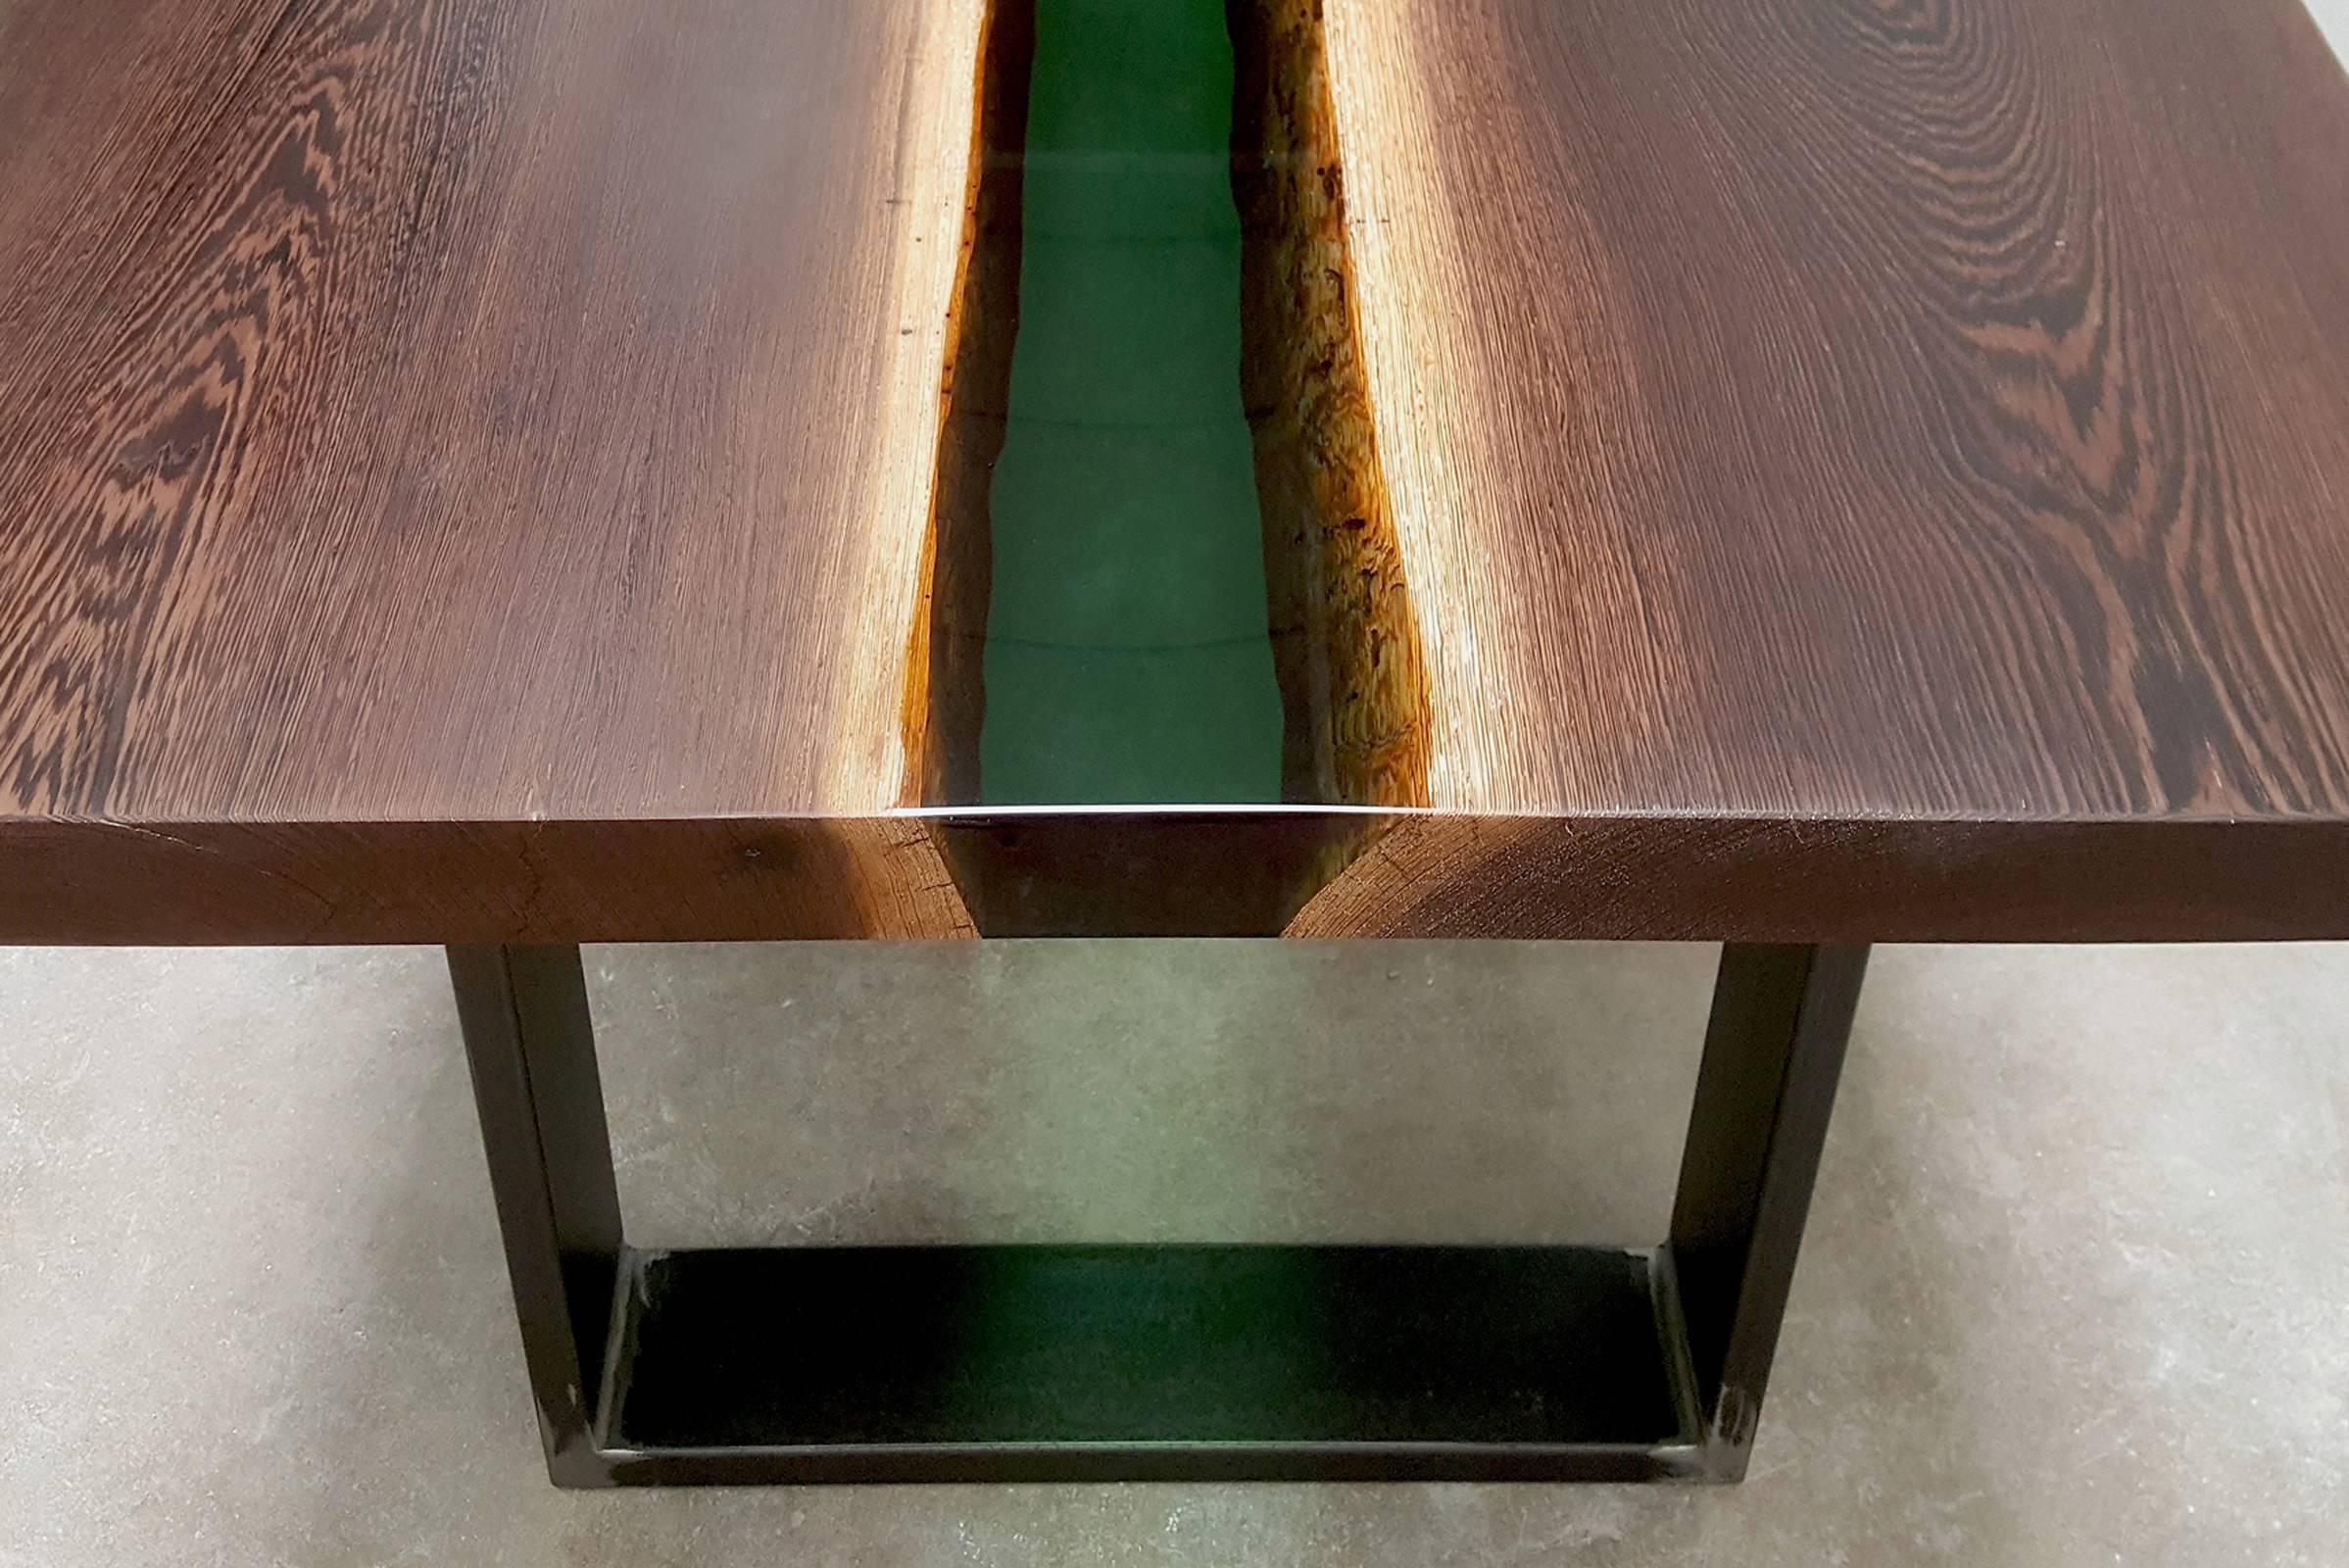 Emerald Forest Dinning Table or Conference Table in Wenge Wood and Resin In Excellent Condition For Sale In Paris, FR